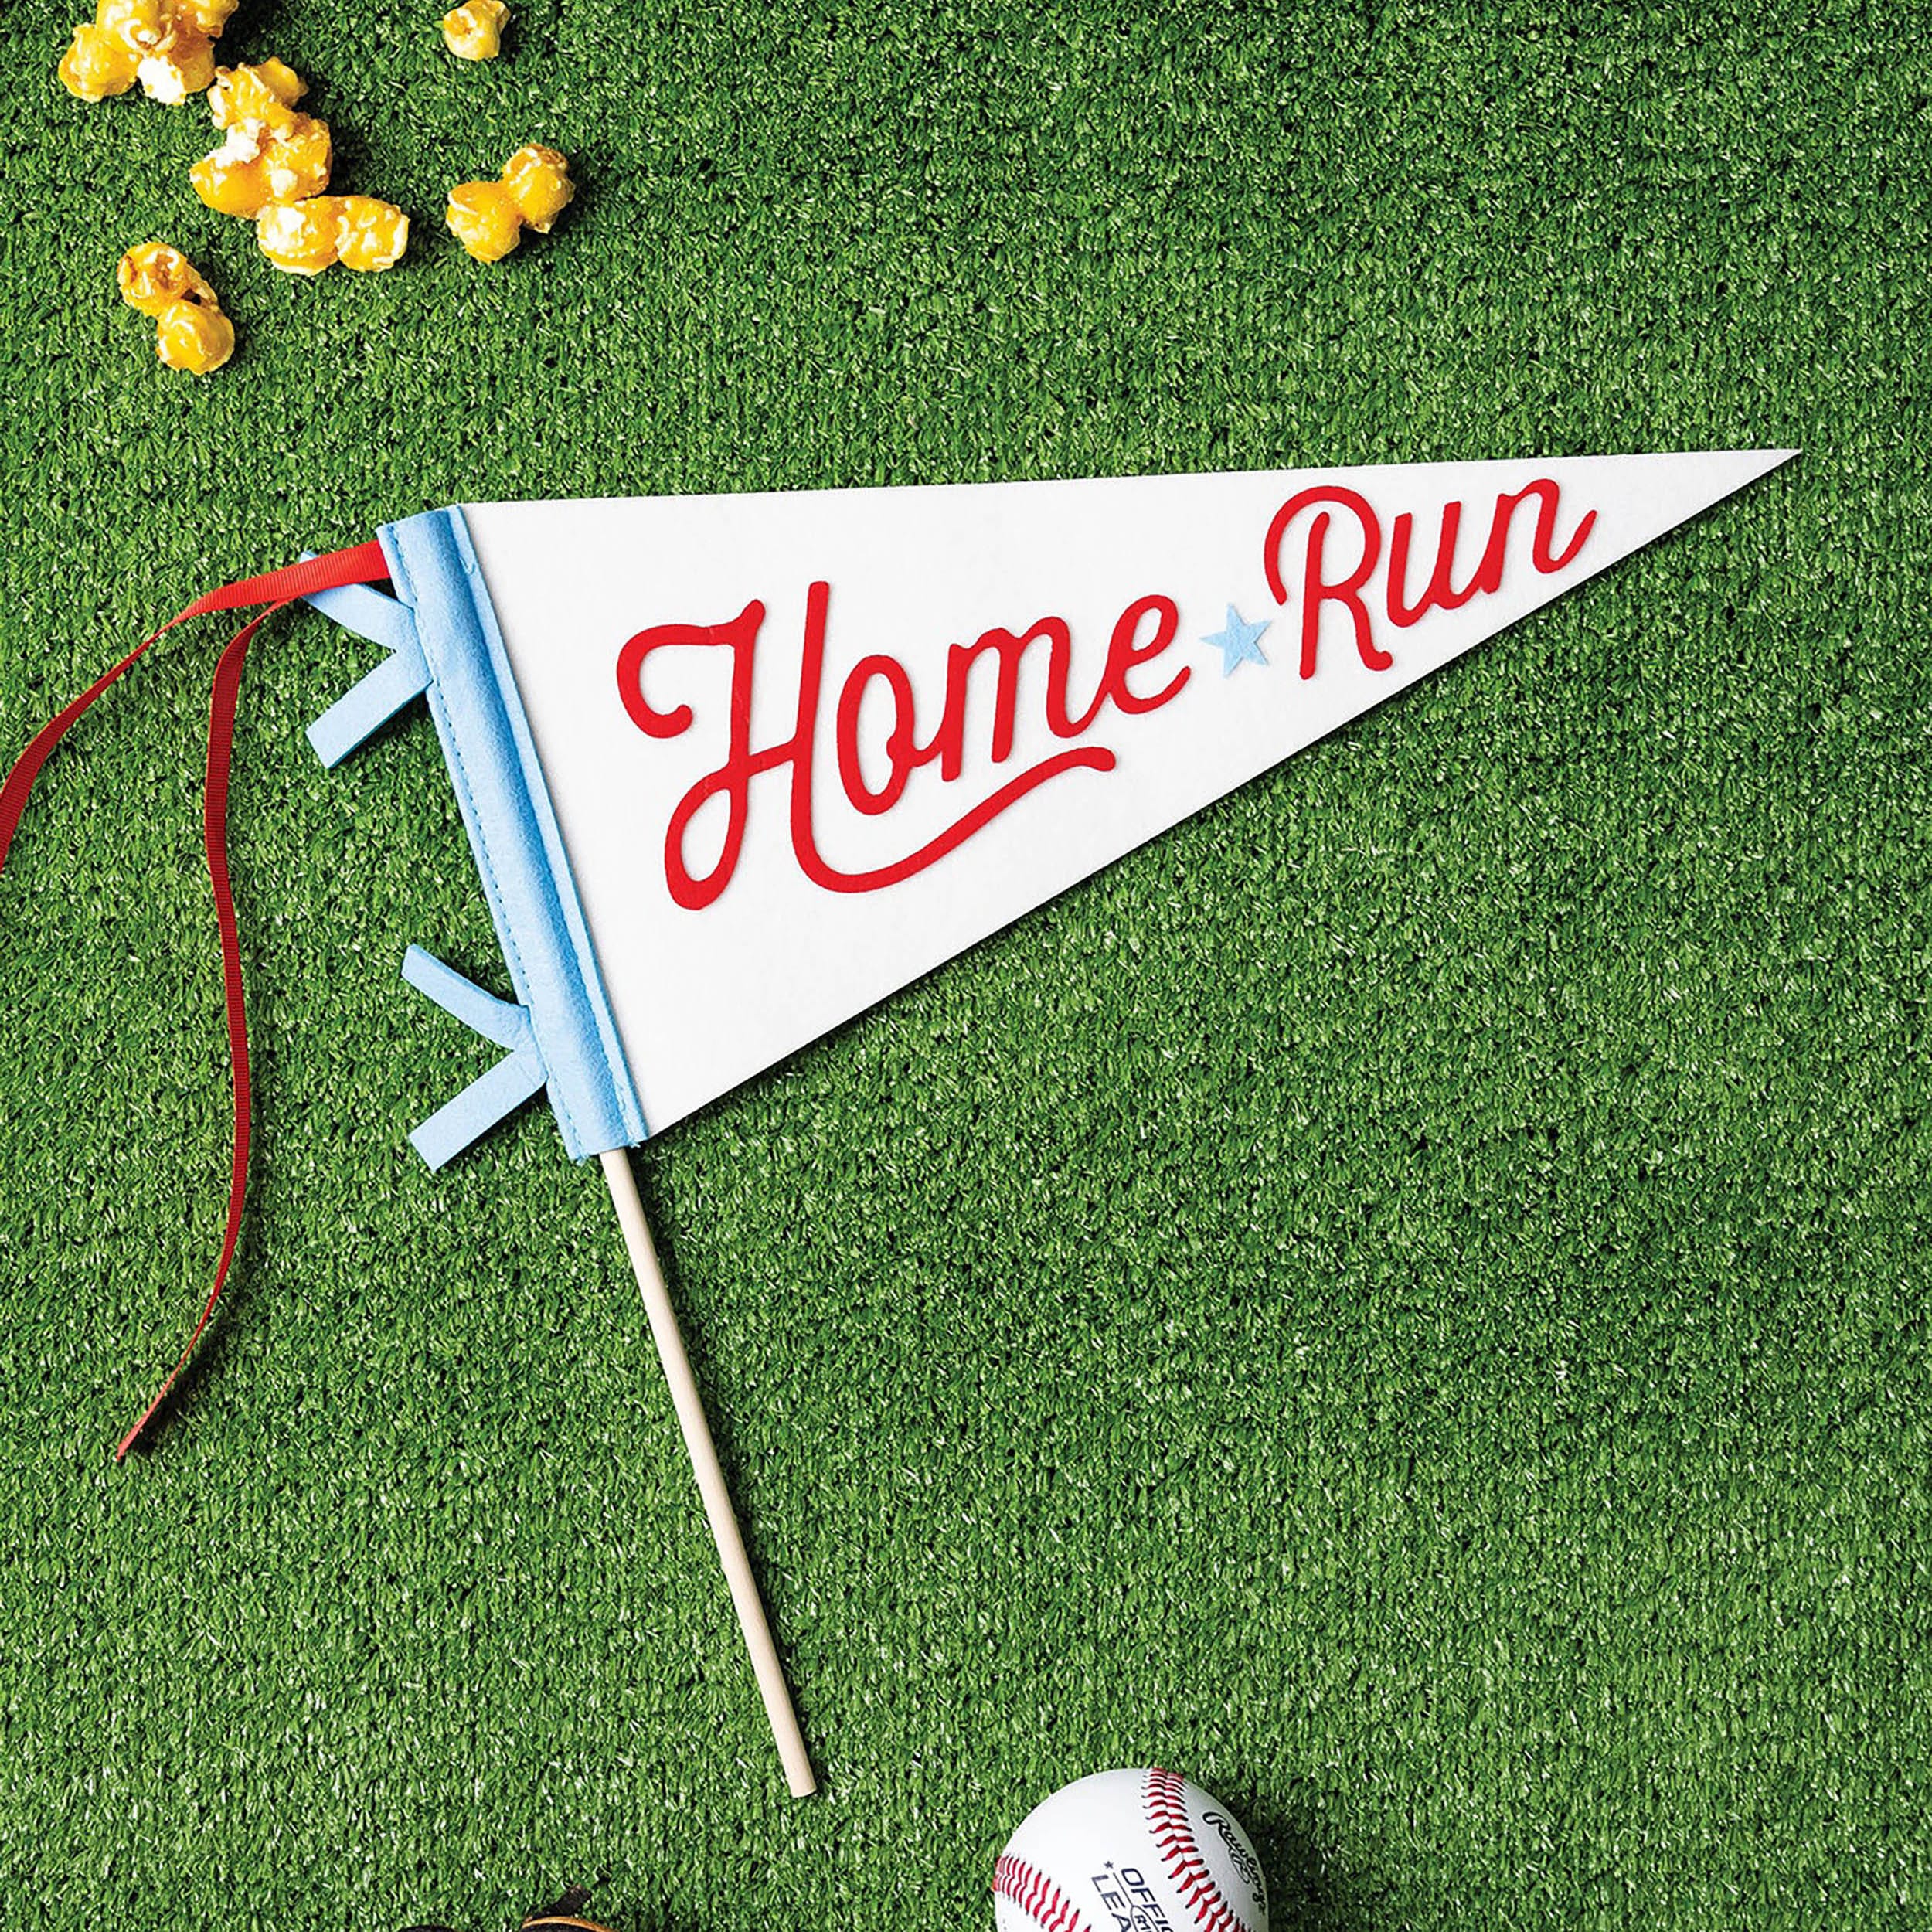 Baseball Pennant Banner - Says Home Run in Red Script - Lifestyle Image of Product on a green turf field - complemented with baseballs, mitt, and caramel corn